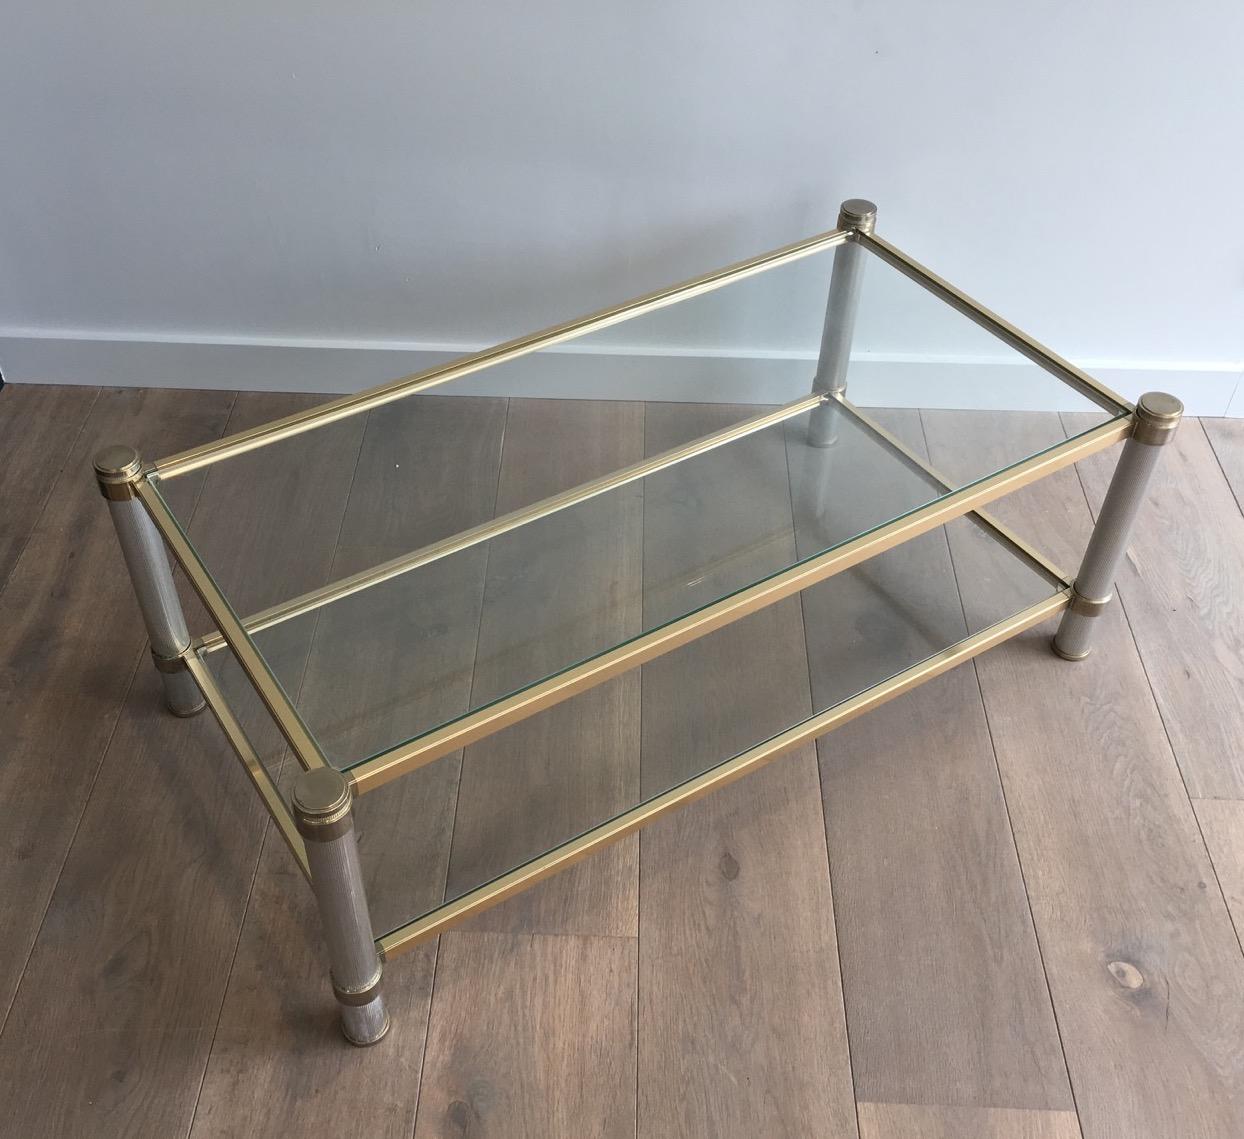  Gold Gilt and Silver Color Aluminium Coffee table with Fluted Legs by P. Vandel For Sale 6